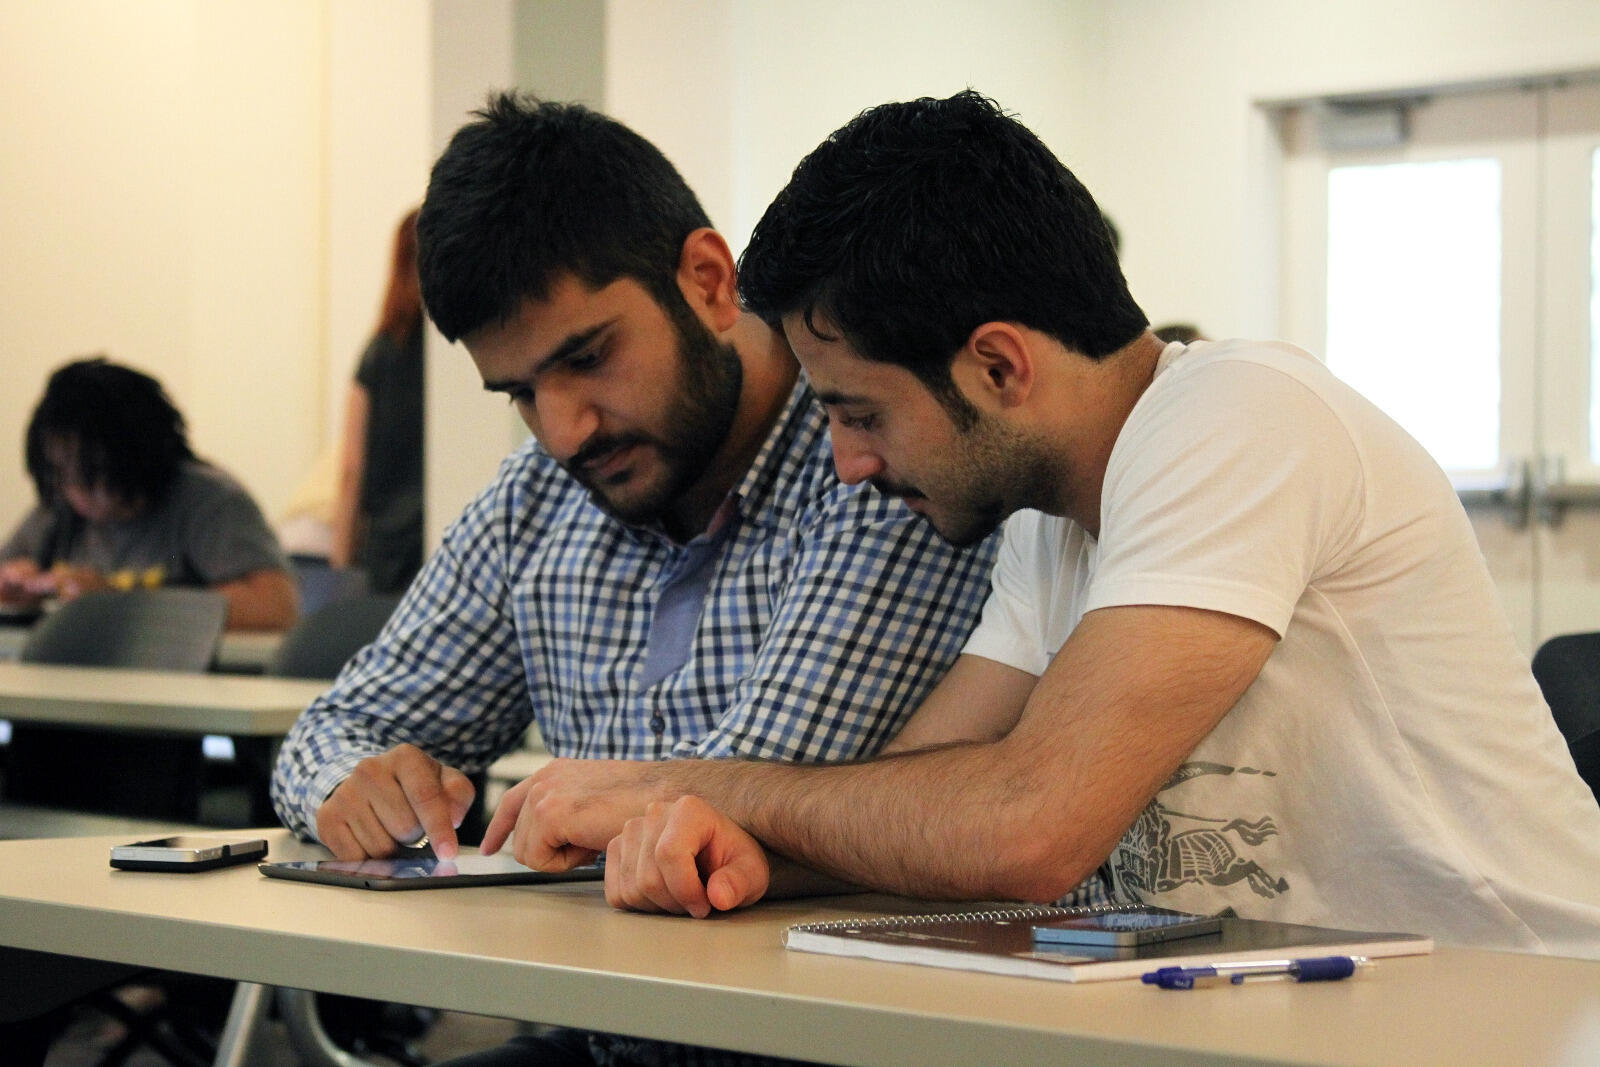 Abdulqayum Adnam Mohammed (left) and Ali Adil Abdulhussein are among 23 young Iraqis who are learning about social media and helping nonprofit organizations alongside 19 VCU students in this summer's Social Media Institute at VCU.
